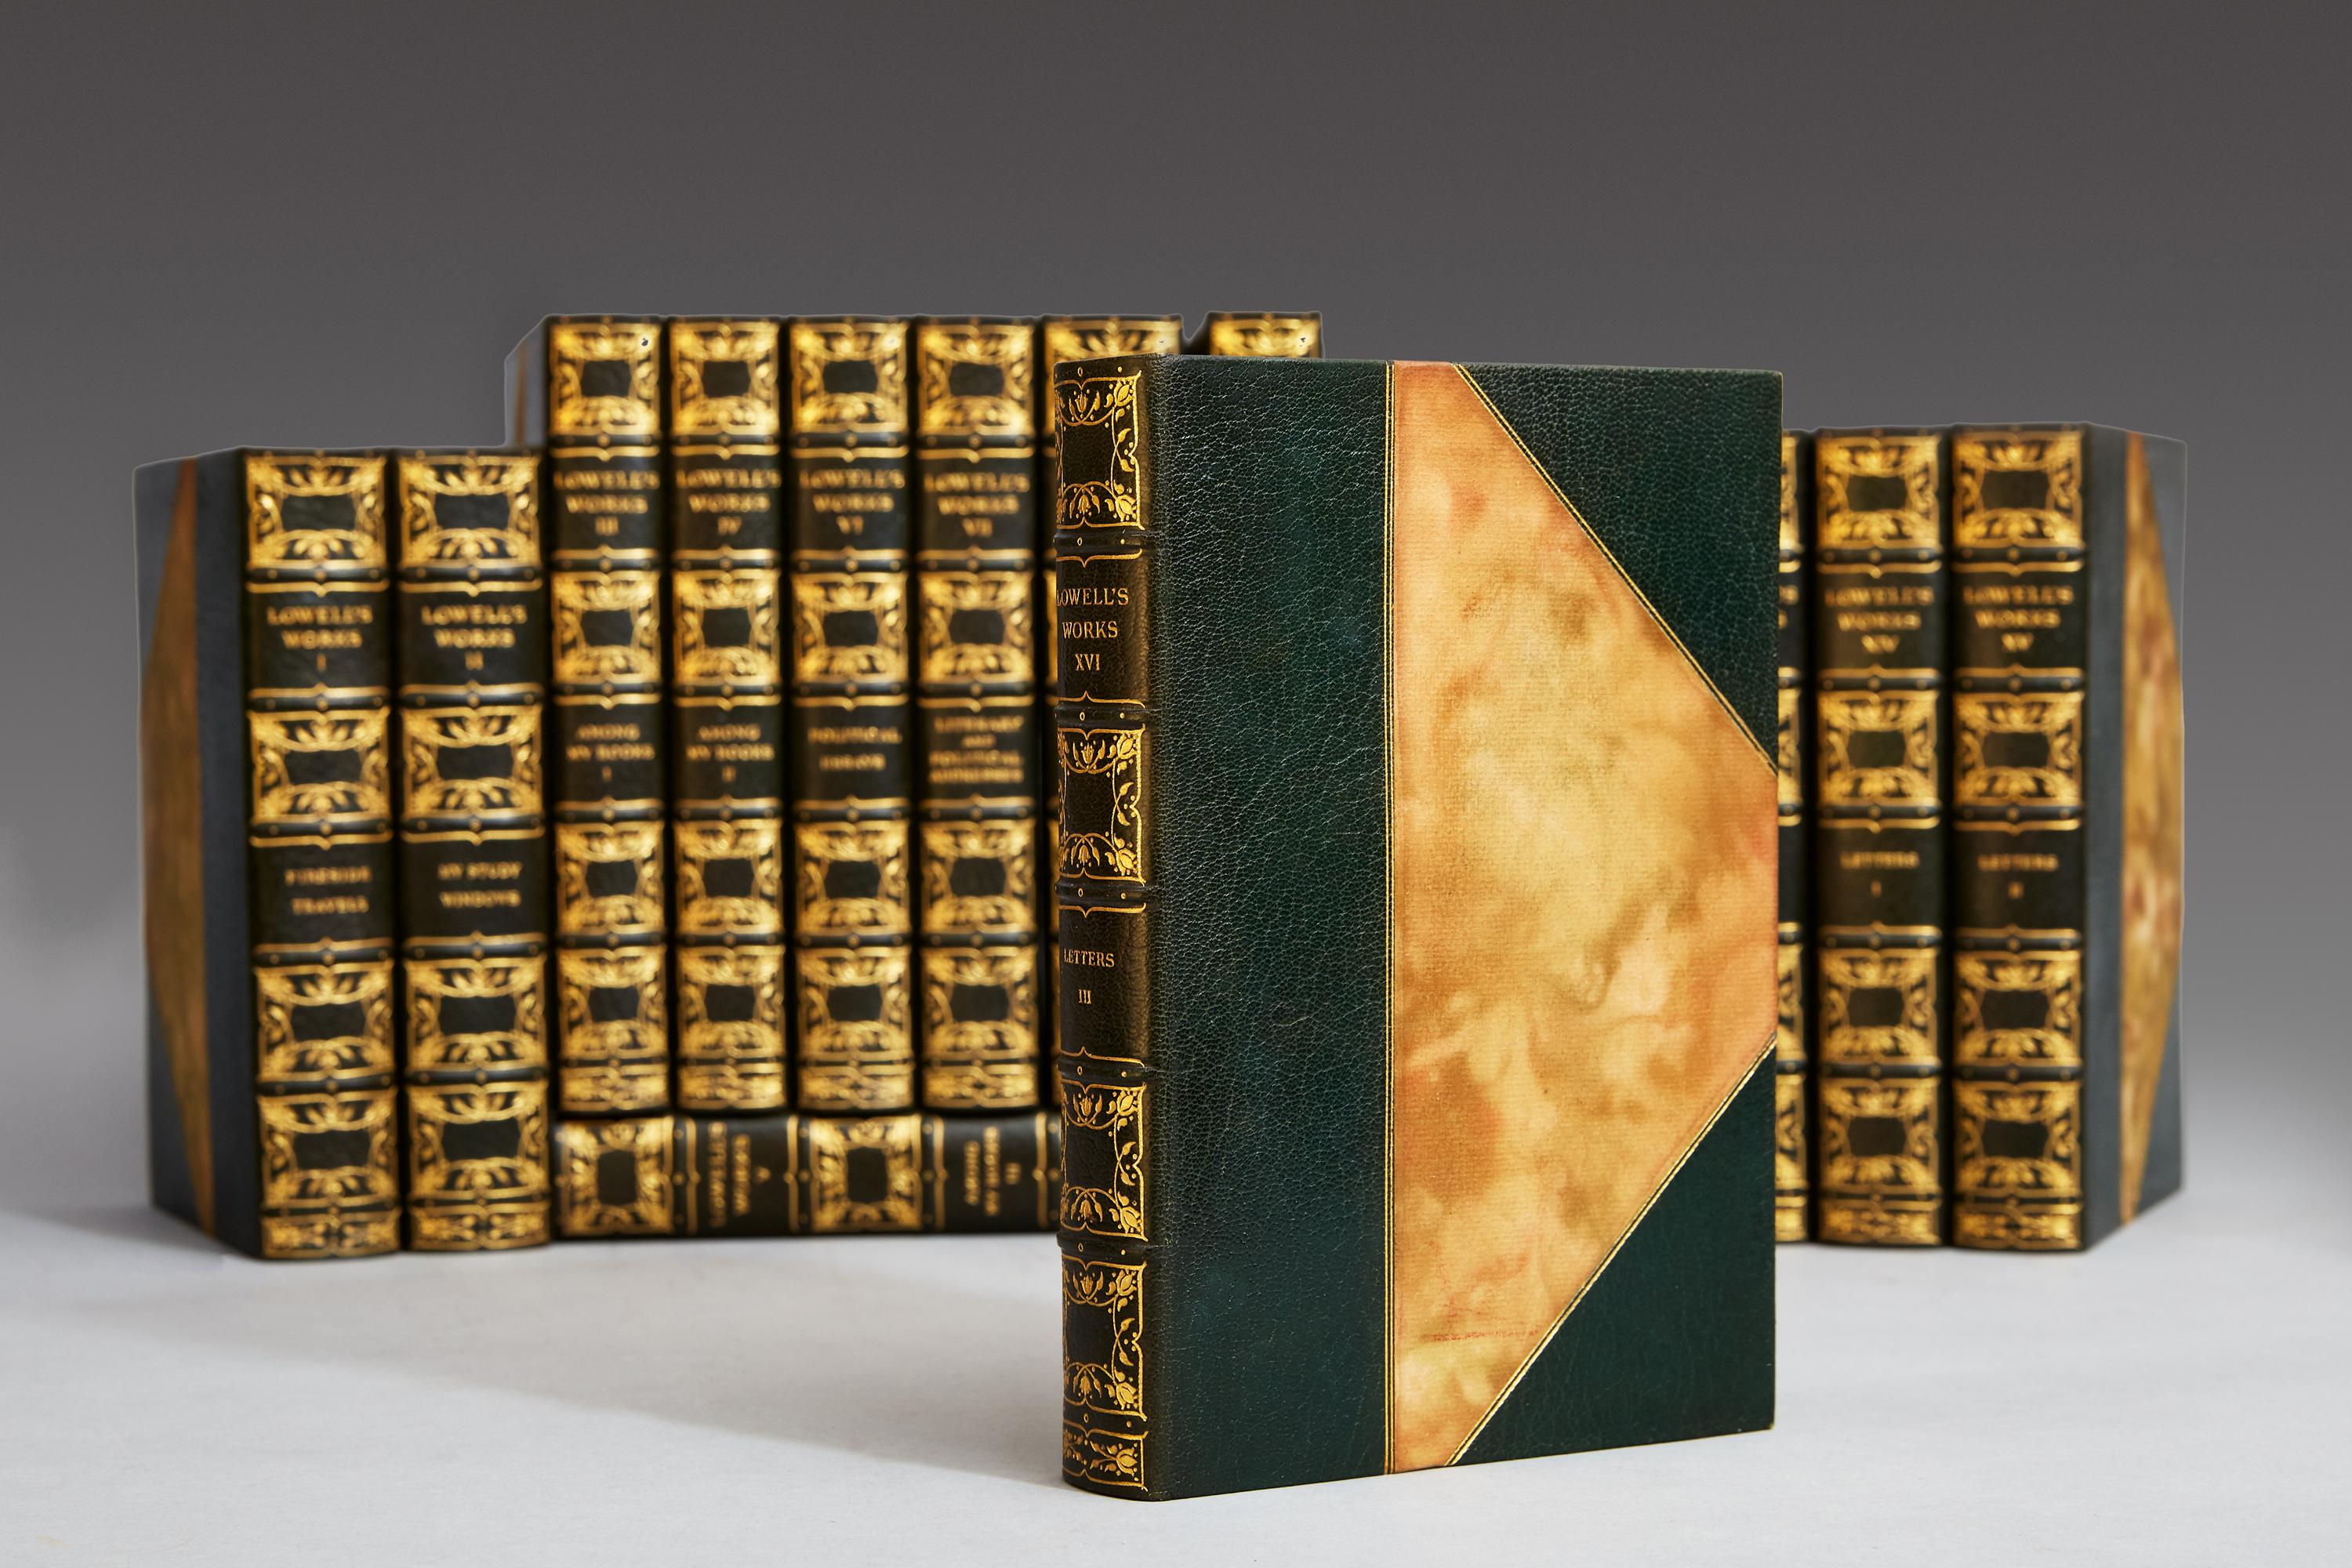 James R. Lowell

Cambridge: Riverside Press, 1904. 

Sixteen volumes. Octavo, three-quarter dark green morocco, gilt spines, top edges gilt. Illustrated with steel portraits and photogravures. 

A handsomely bound set in fine condition.